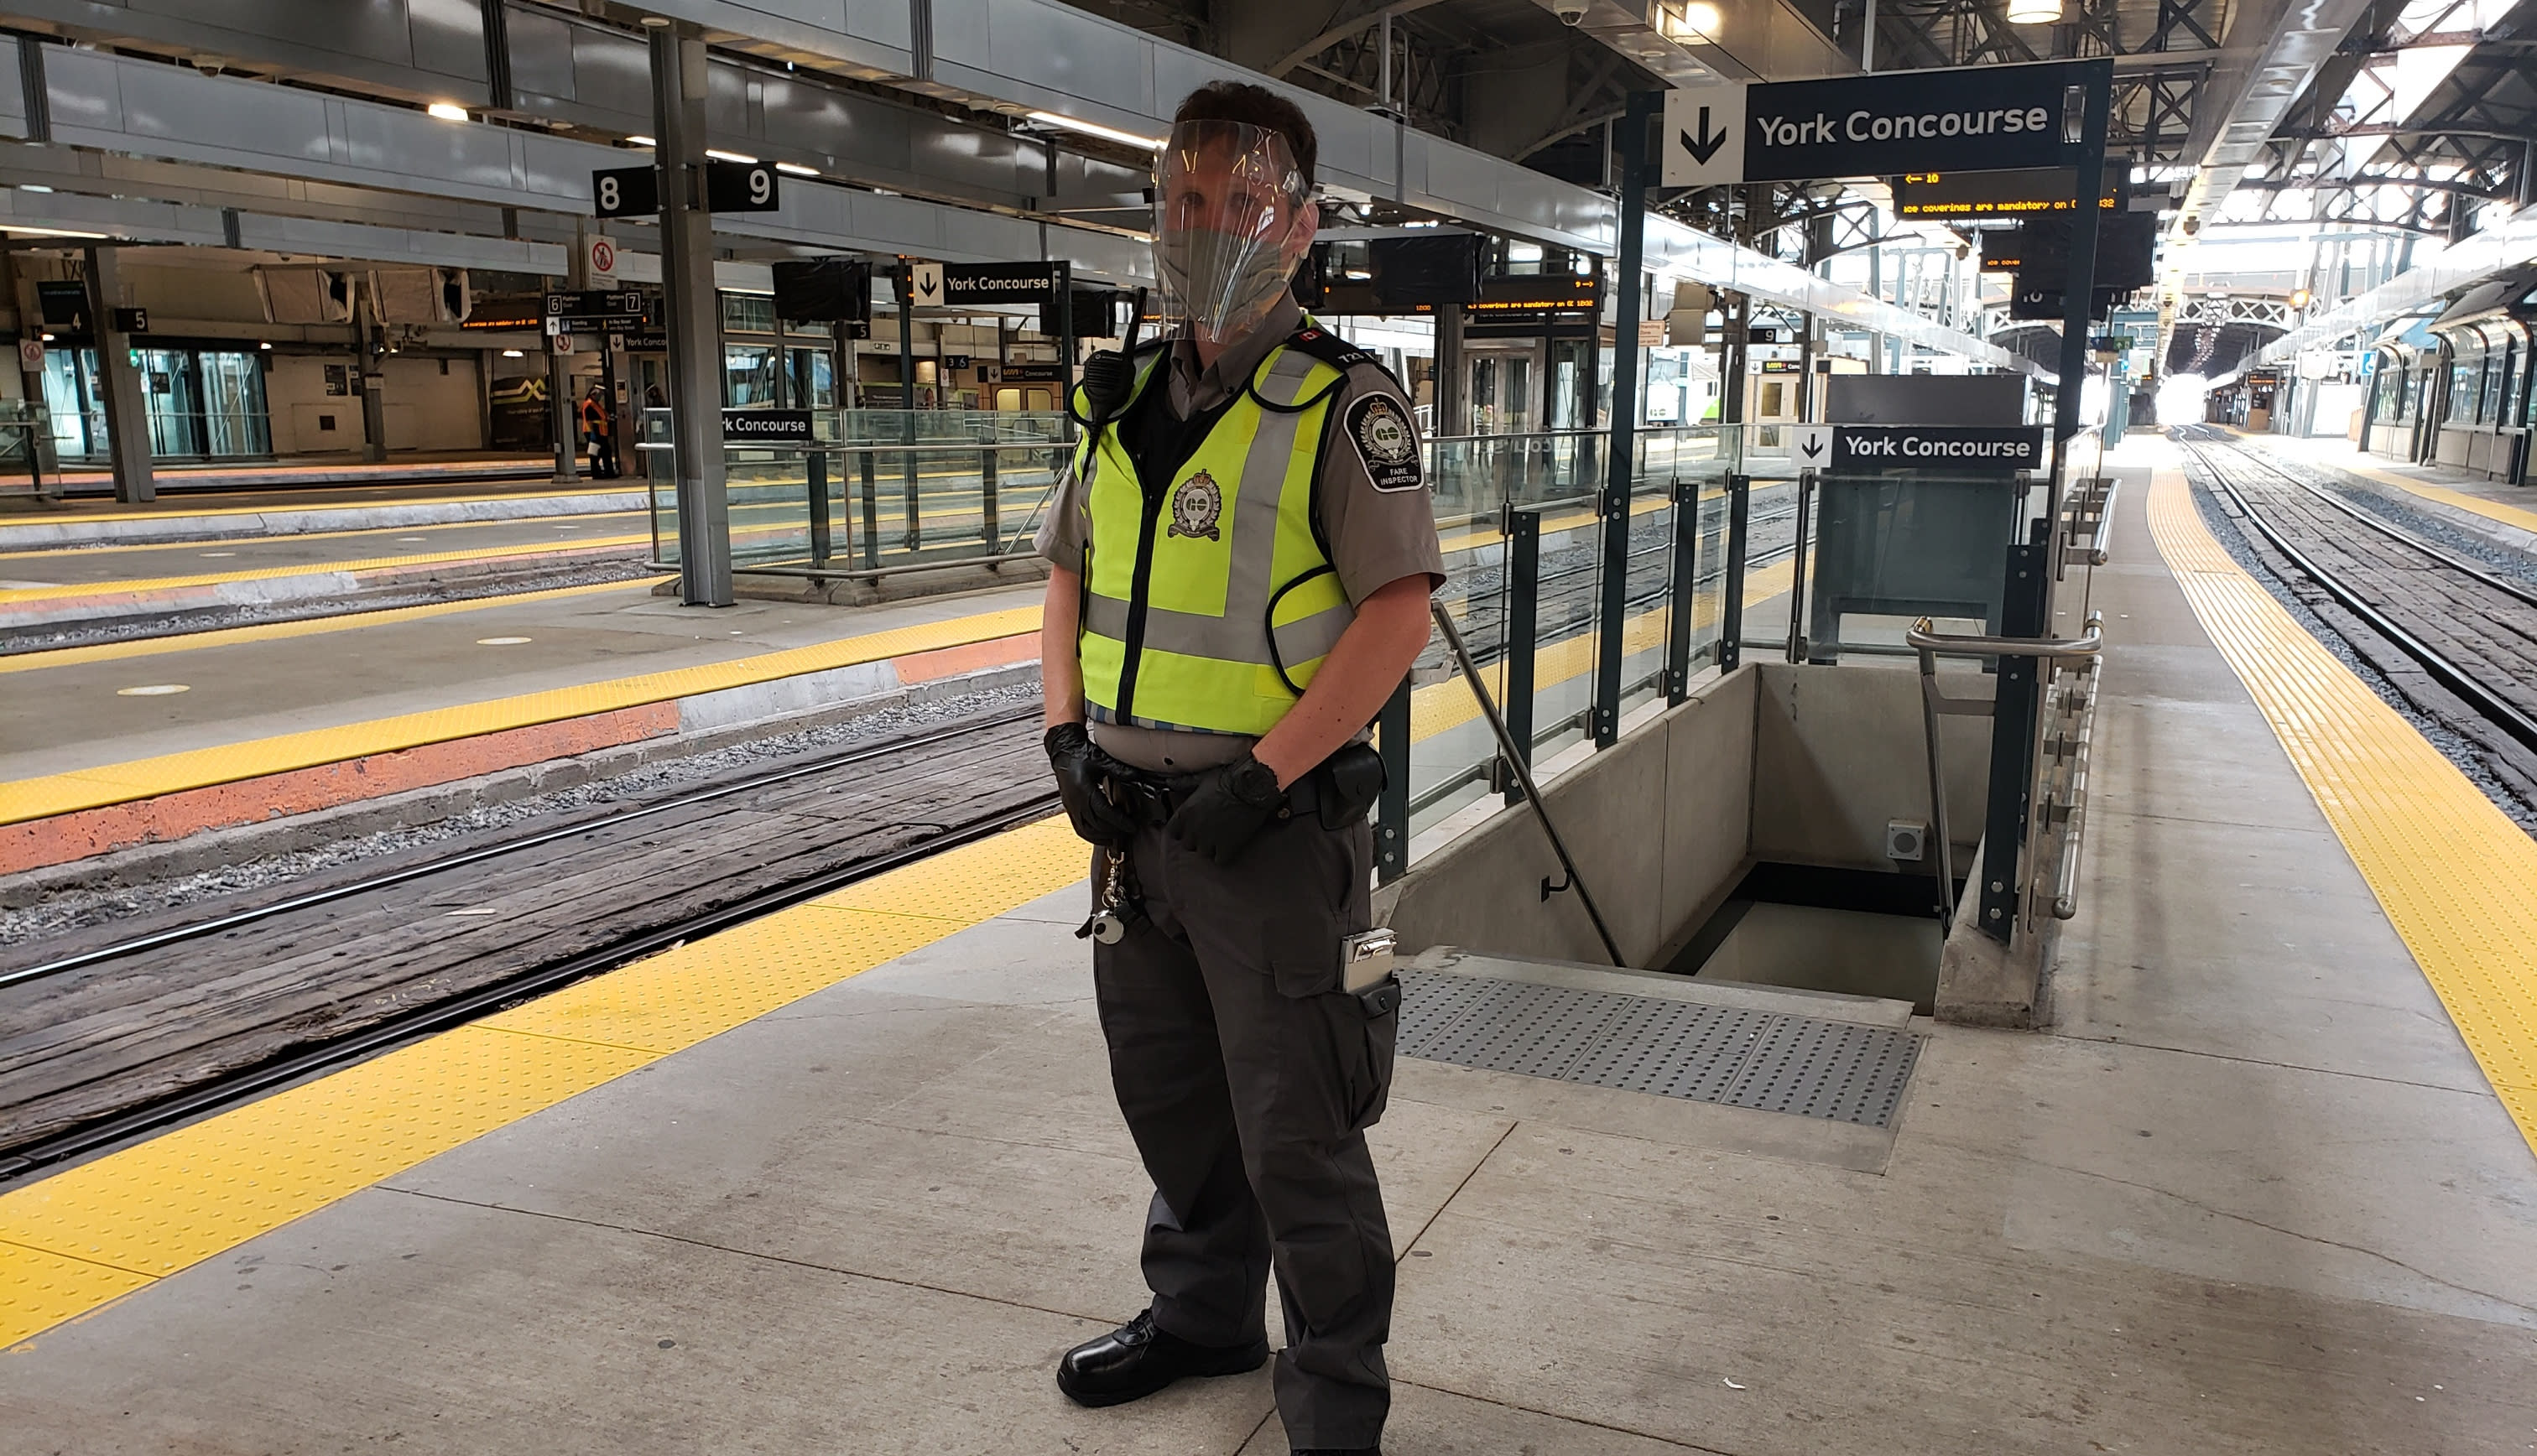 Fare inspectors will be decked out in new safety gear